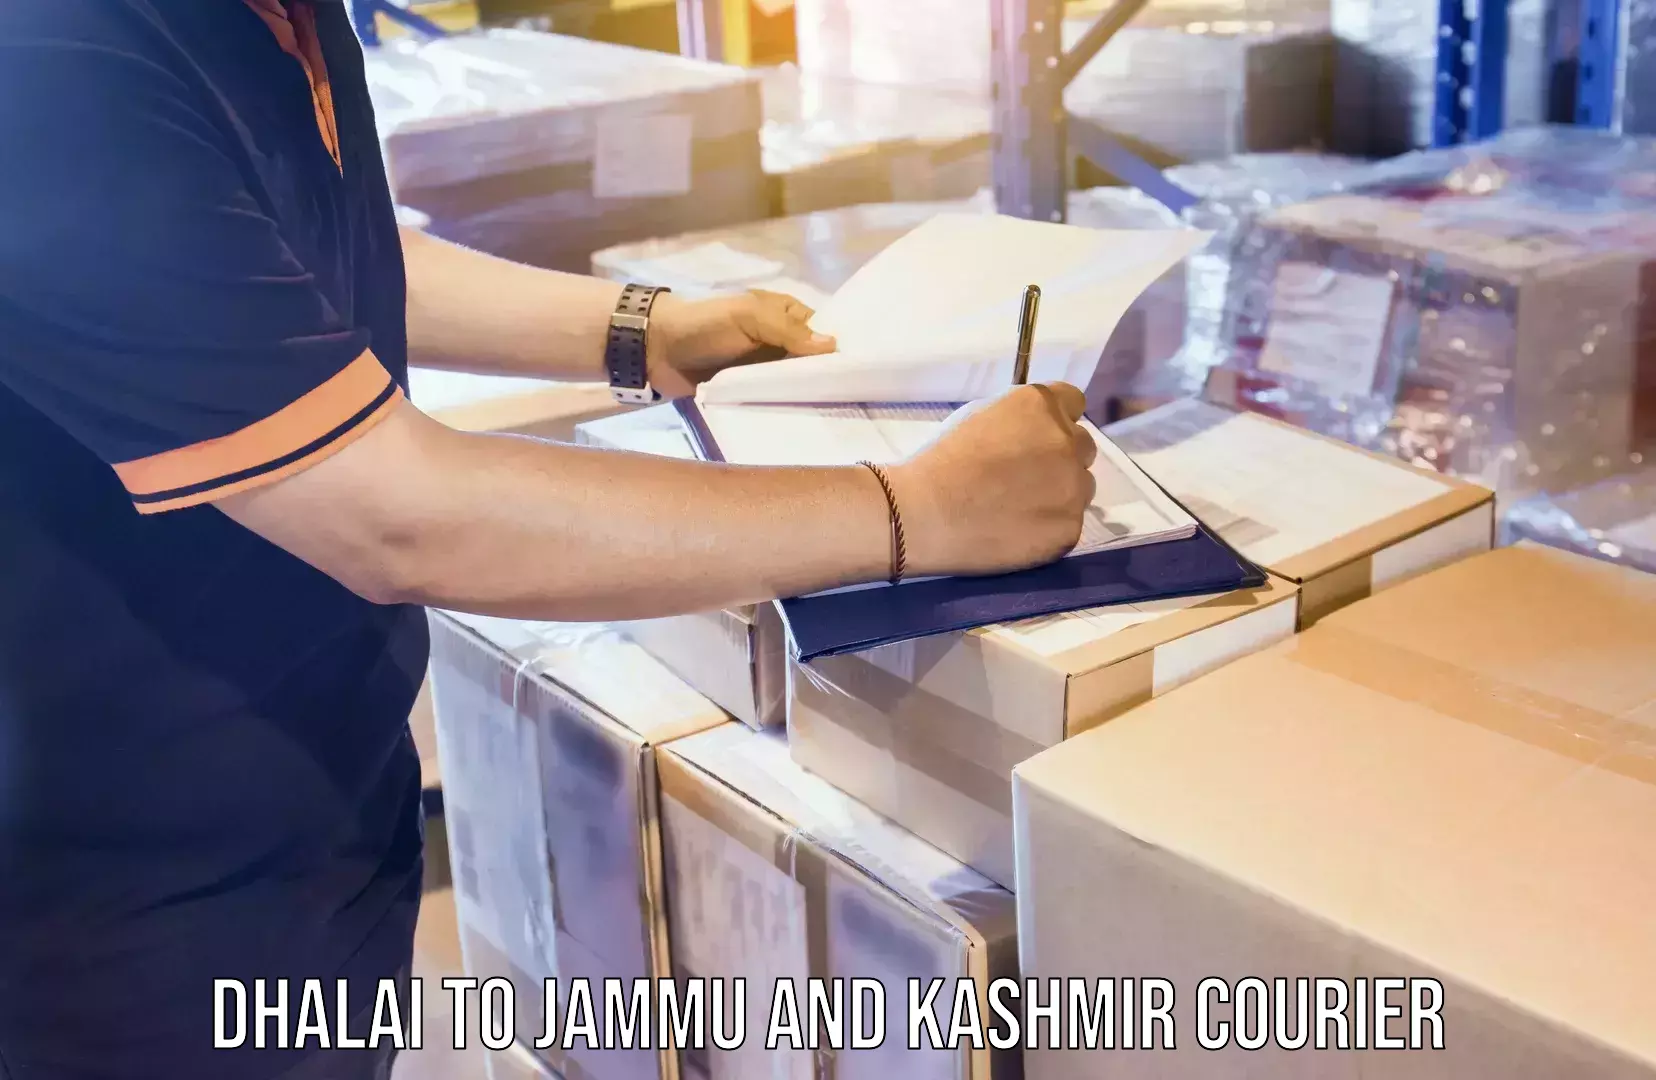 Cash on delivery service Dhalai to Jammu and Kashmir